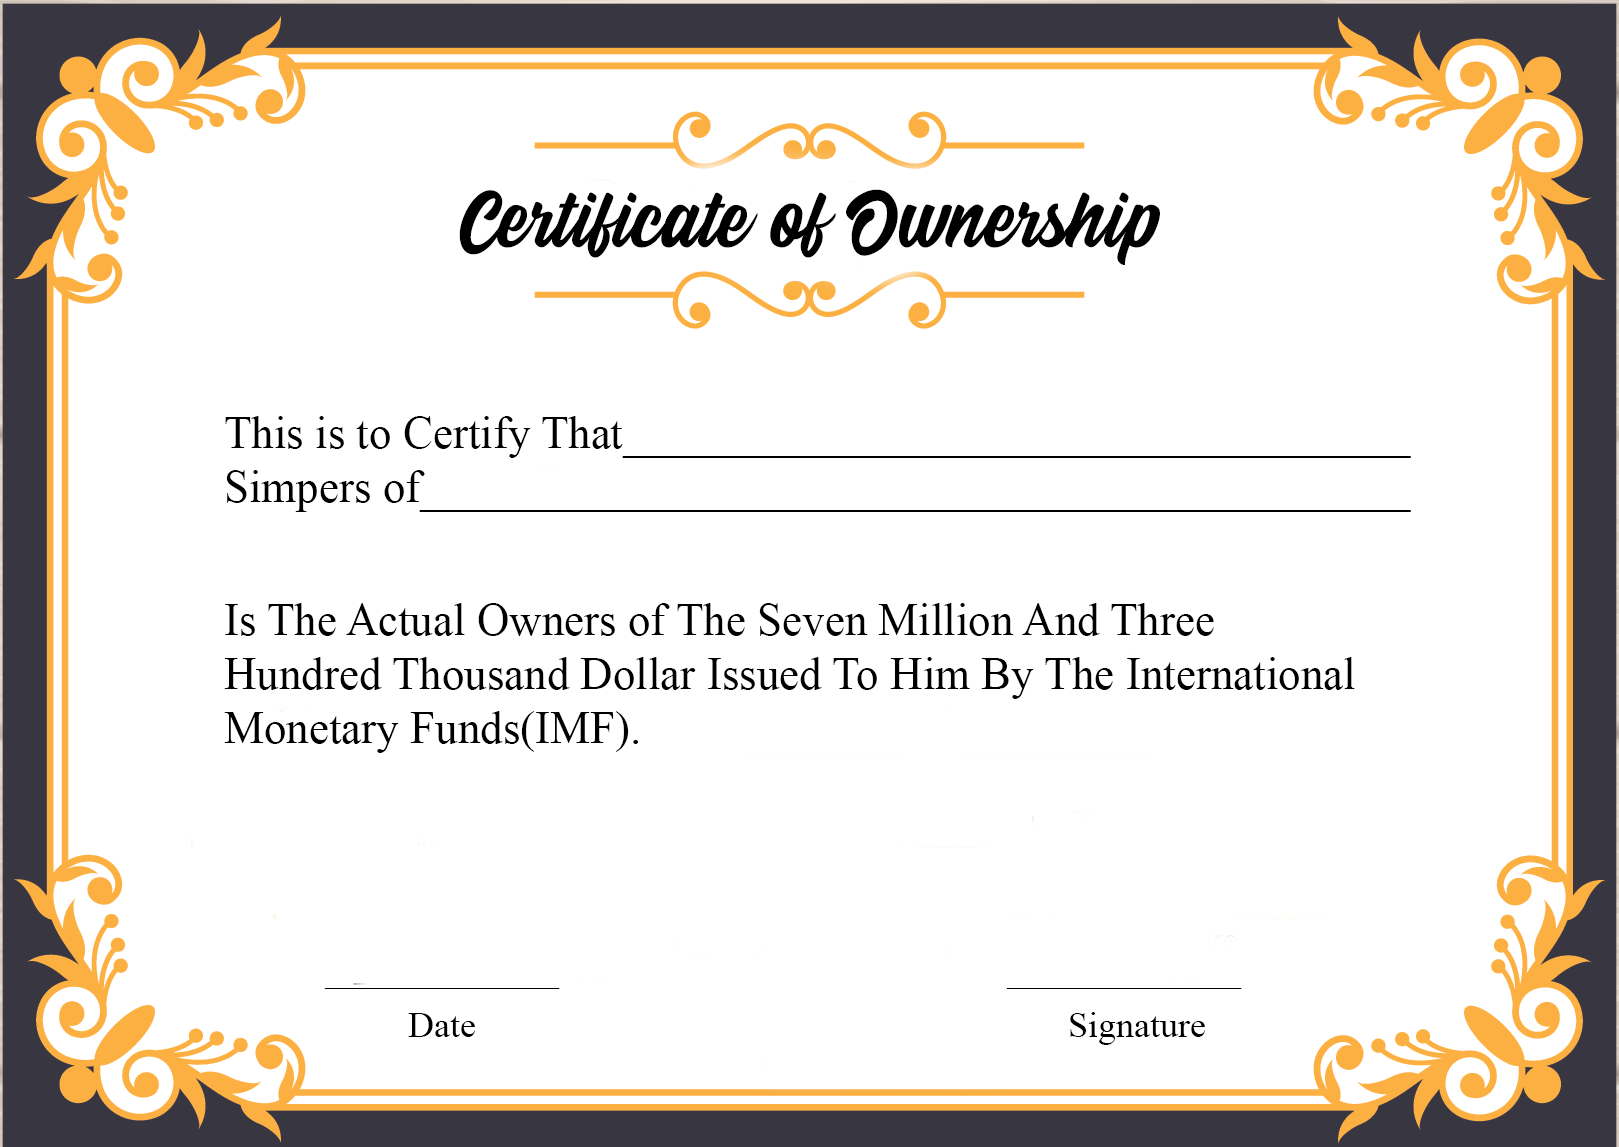 ❤️10+ Free Sample of Certificate of Ownership form Template❤️ For Ownership Certificate Template